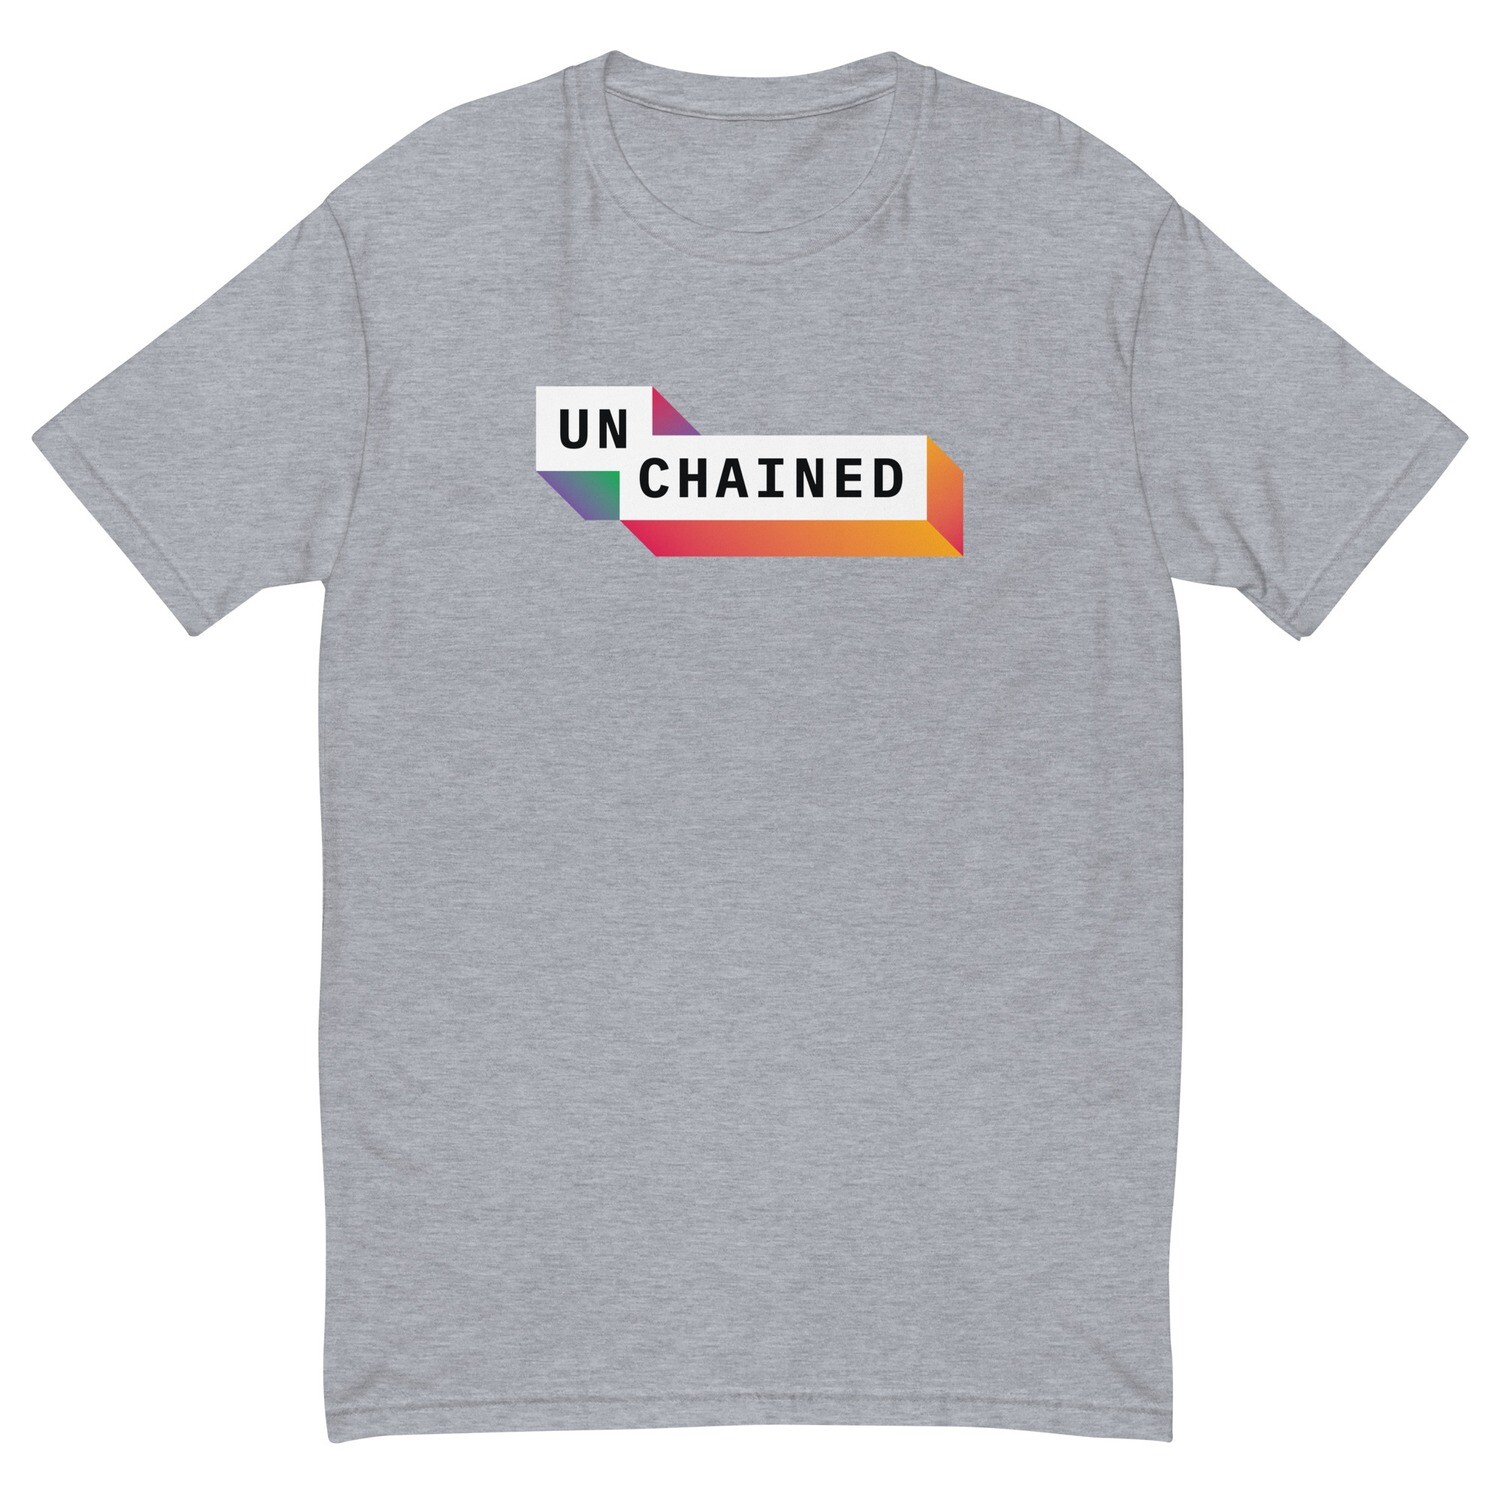 The Unchained T-Shirt -- Heather Grey